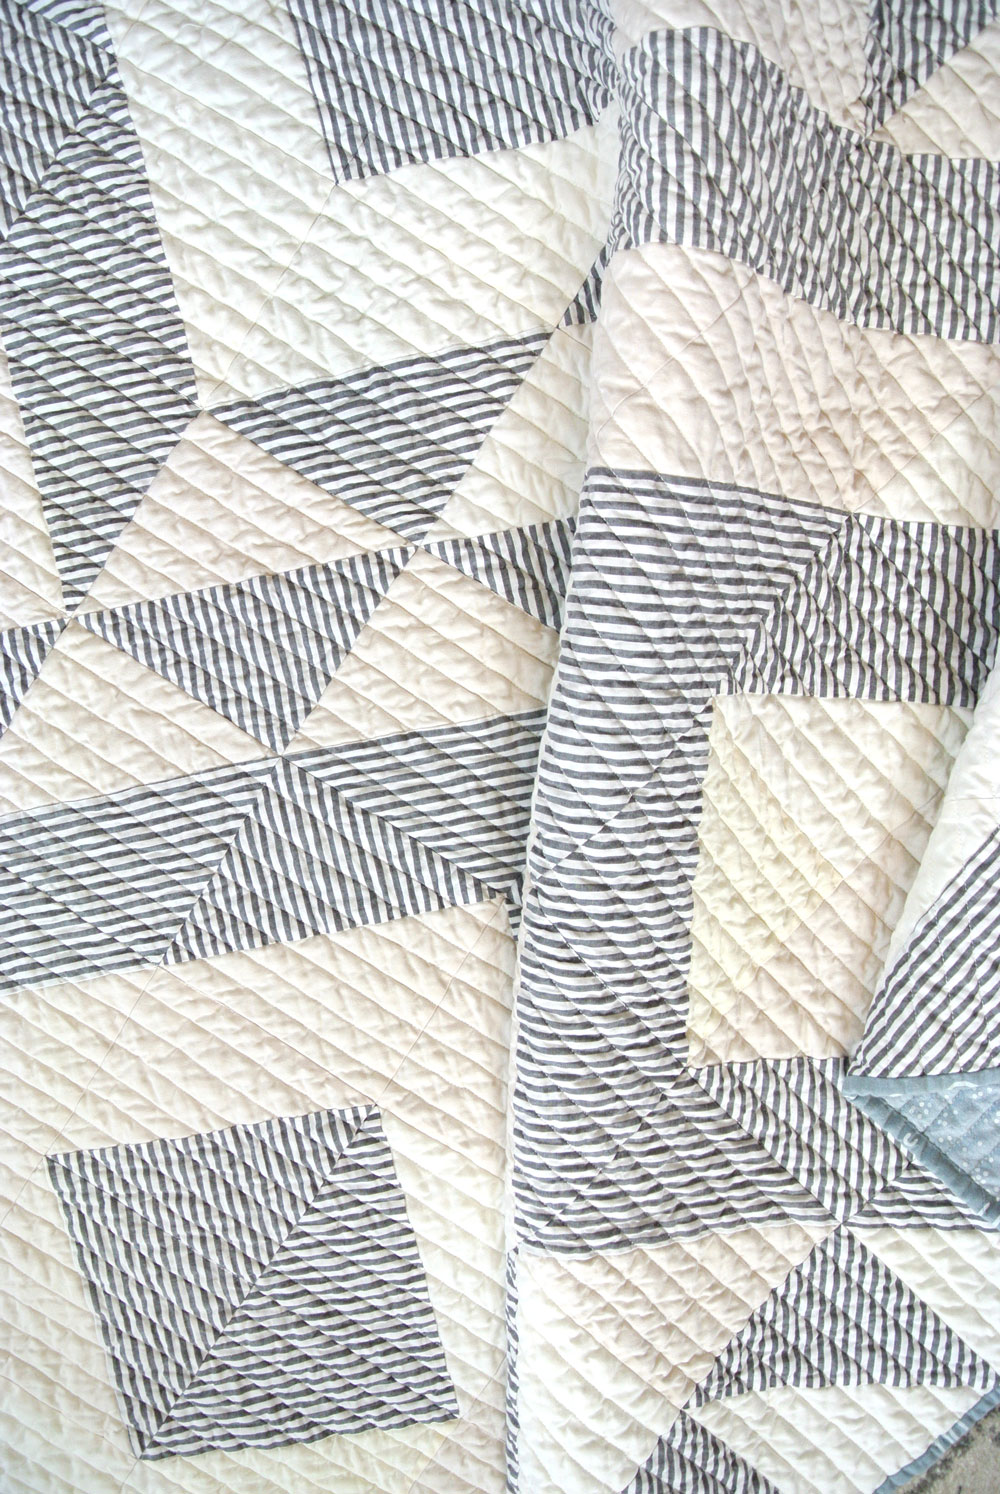 The crinkled straight line quilting on this Triangle Jitters quilt shows what fabric looks like after it is washed